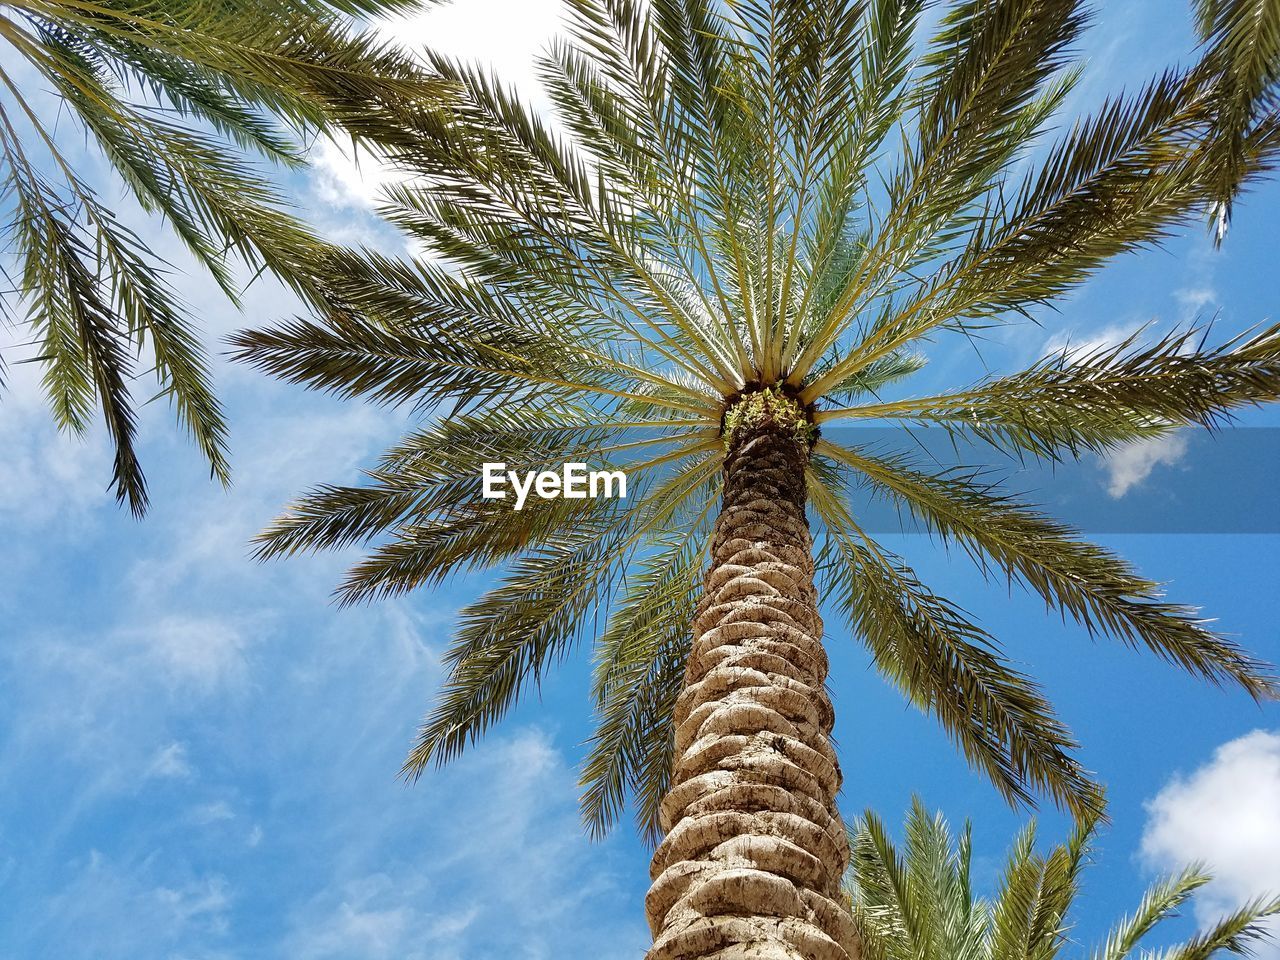 CLOSE-UP OF PALM TREE AGAINST BLUE SKY